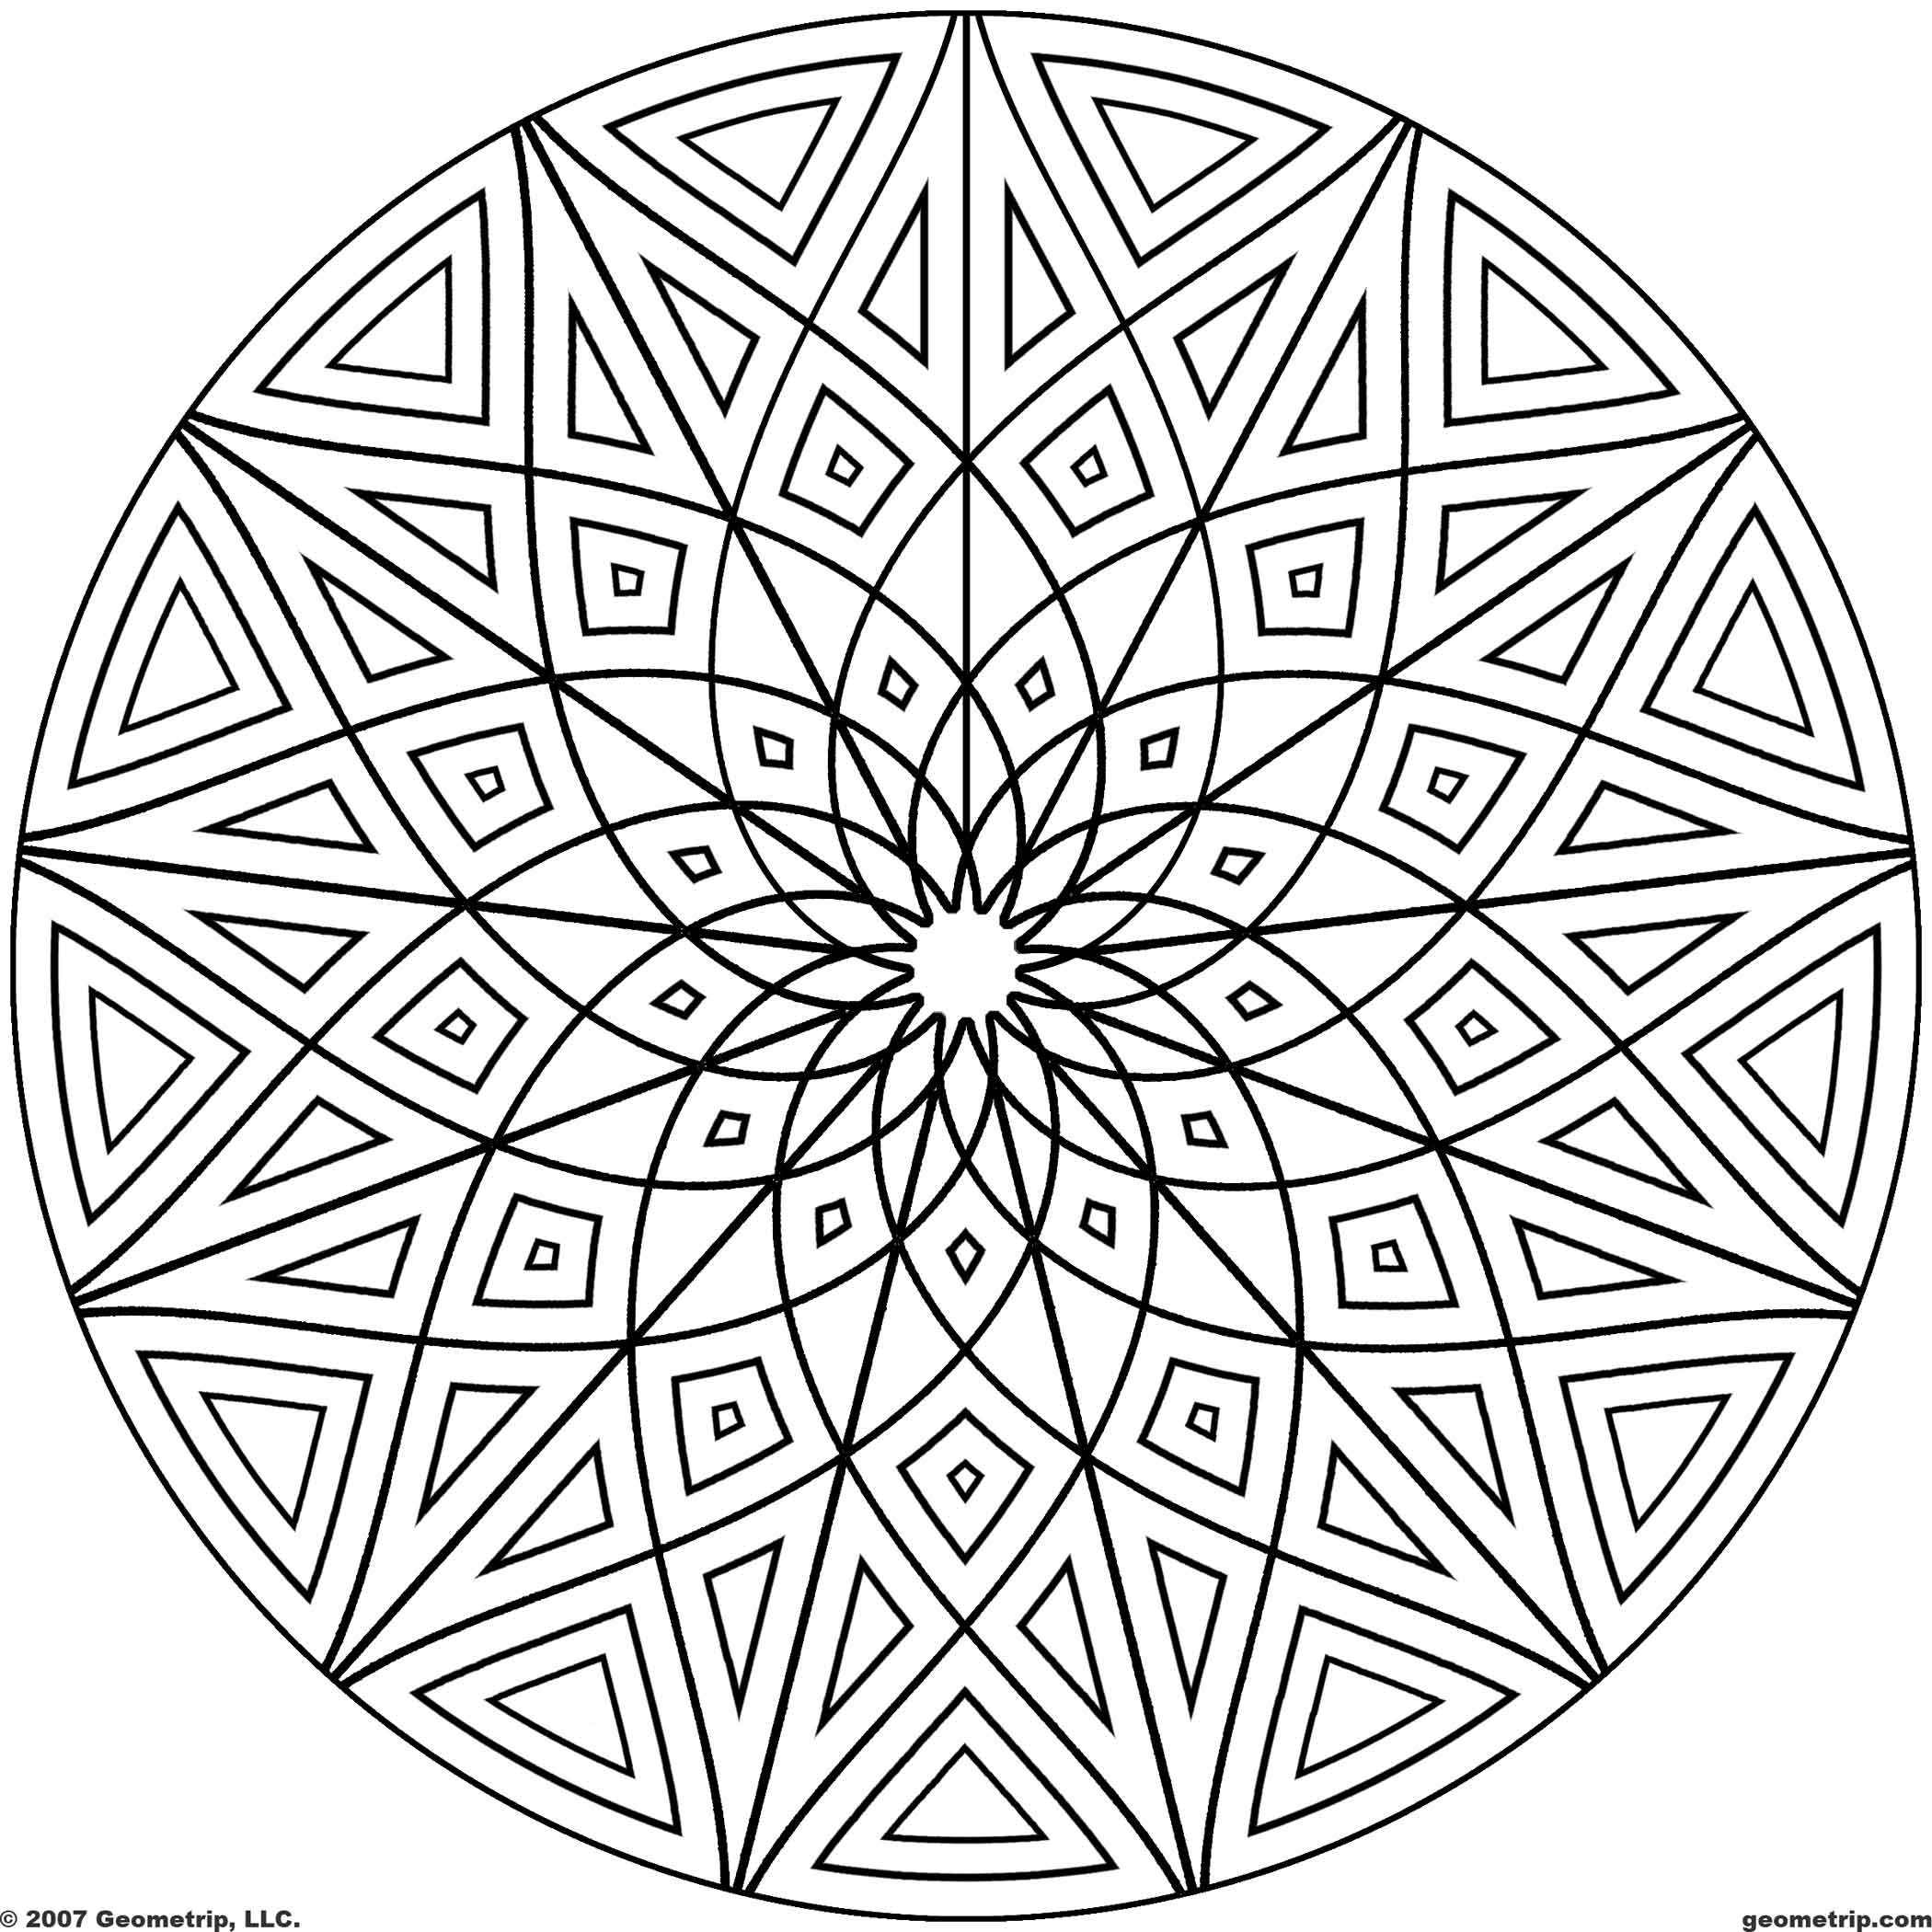 Geometric Coloring Pages For Kids
 Geometric Patterns For Kids To Color Coloring Pages For